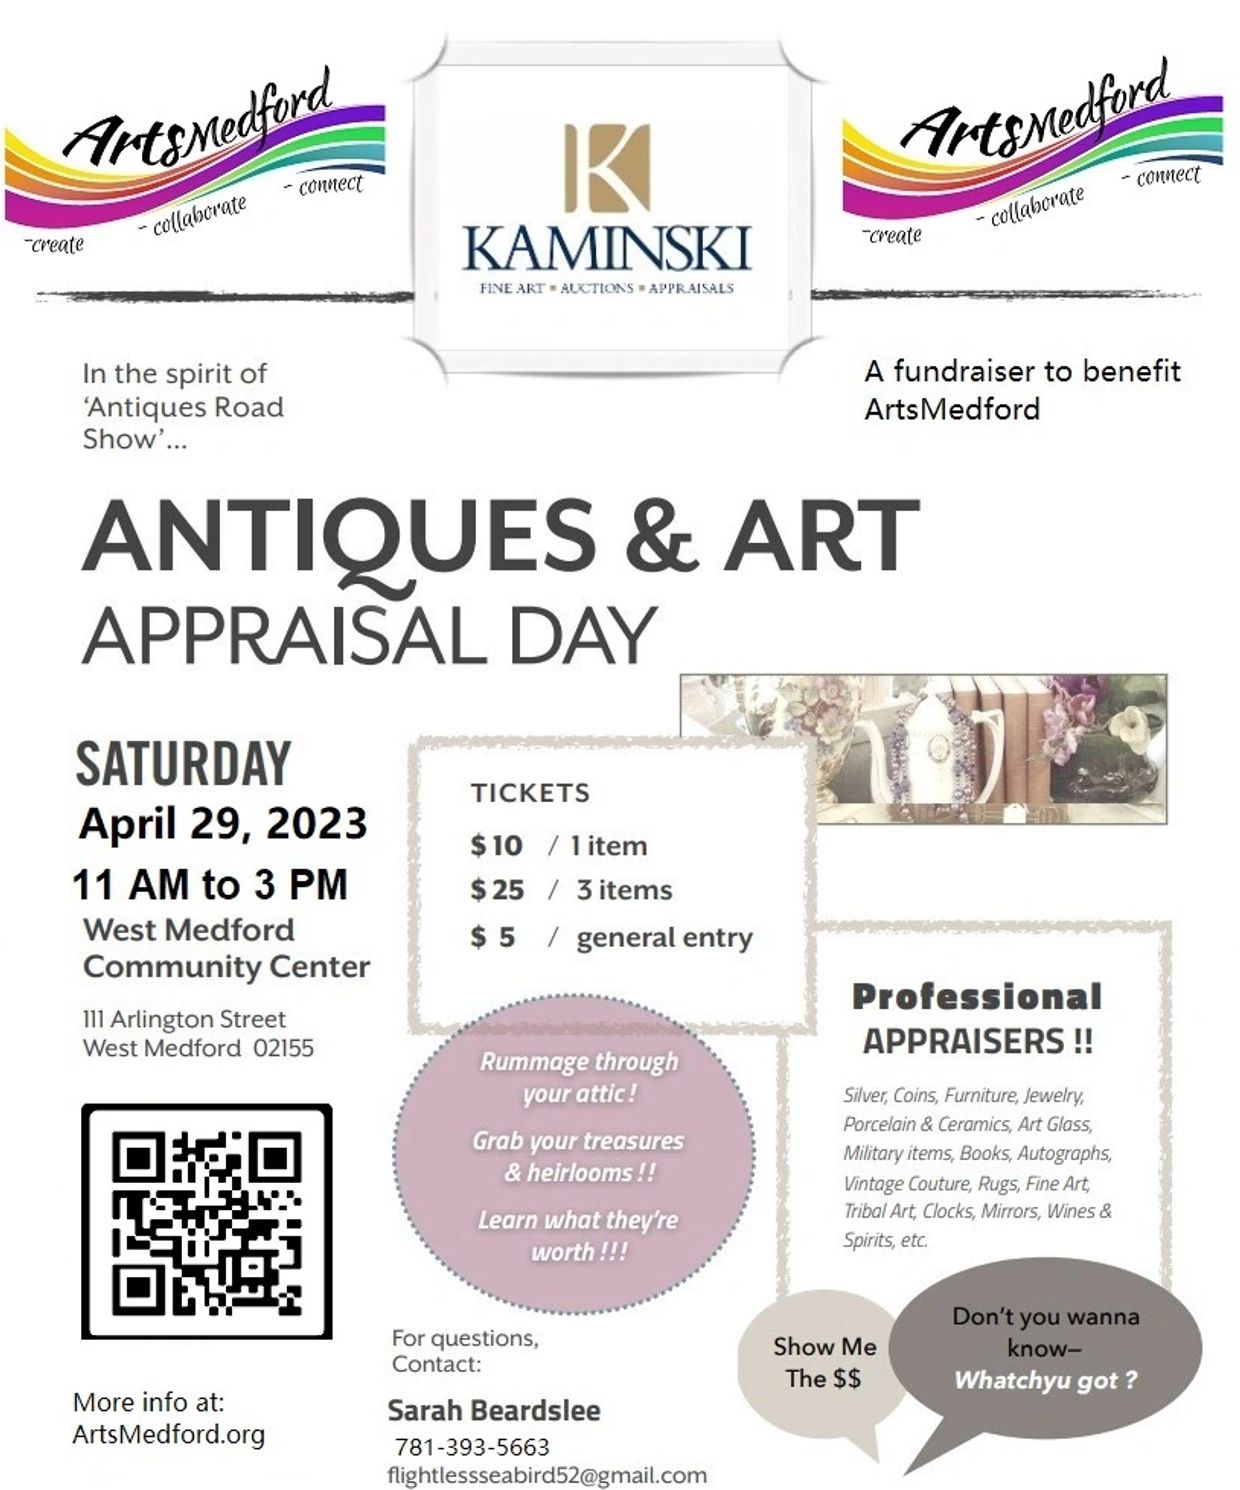 Click on image to get tickets Art and Antique Appraisal event with professional appraisers! 